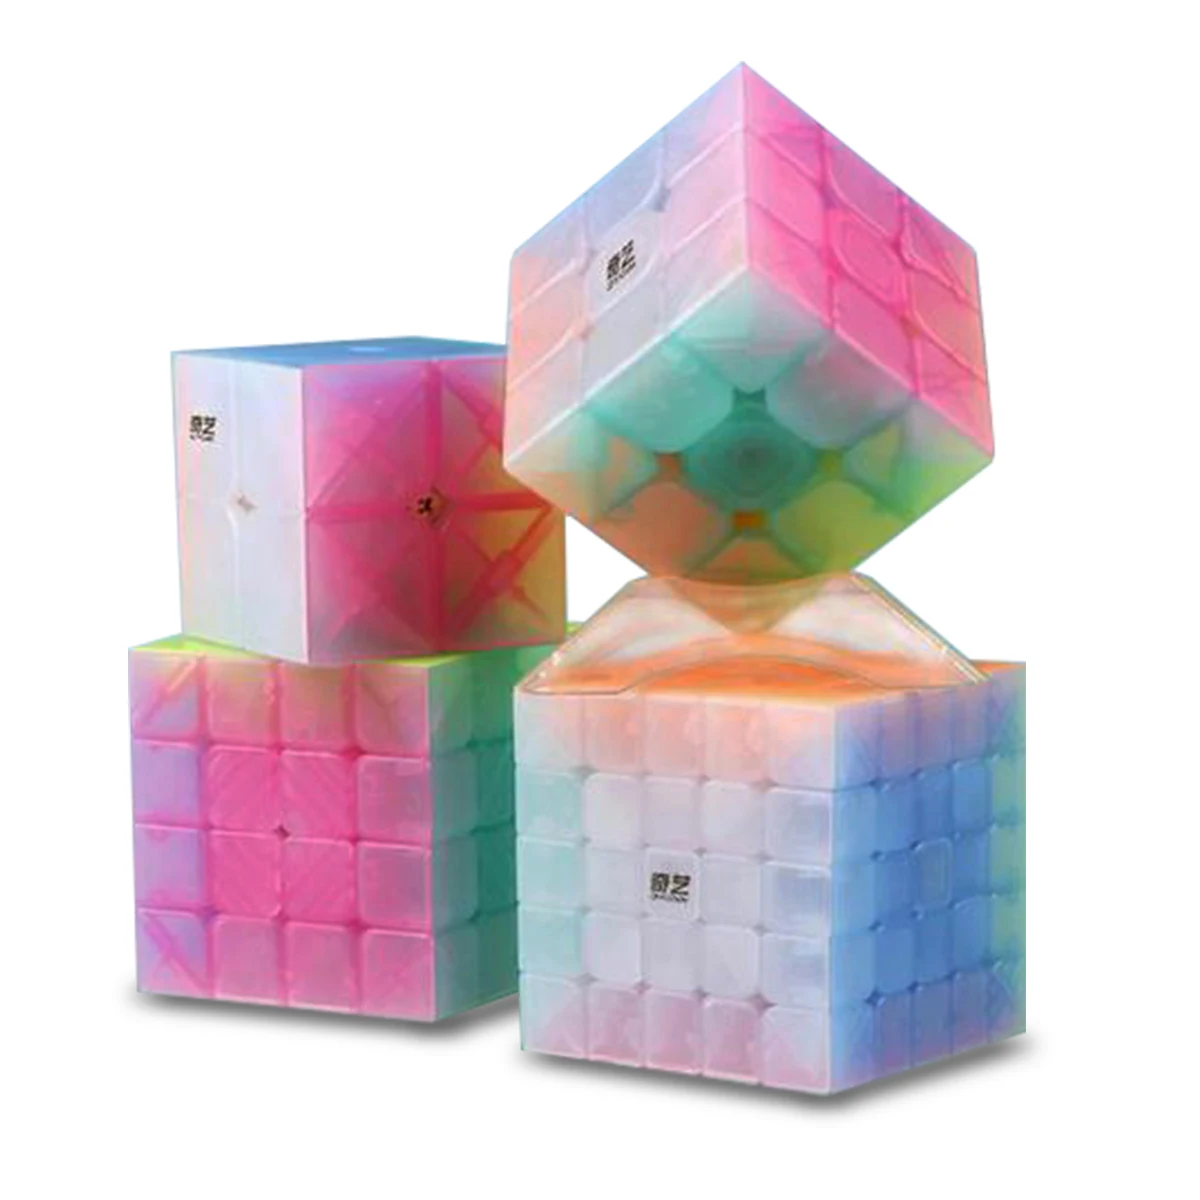 

QiYi 2x2 3x3 4x4 5x5 Jelly Cube Design Speed Cube Puzzle Magic Cube Base Cubo Magico Educational Toys For Children